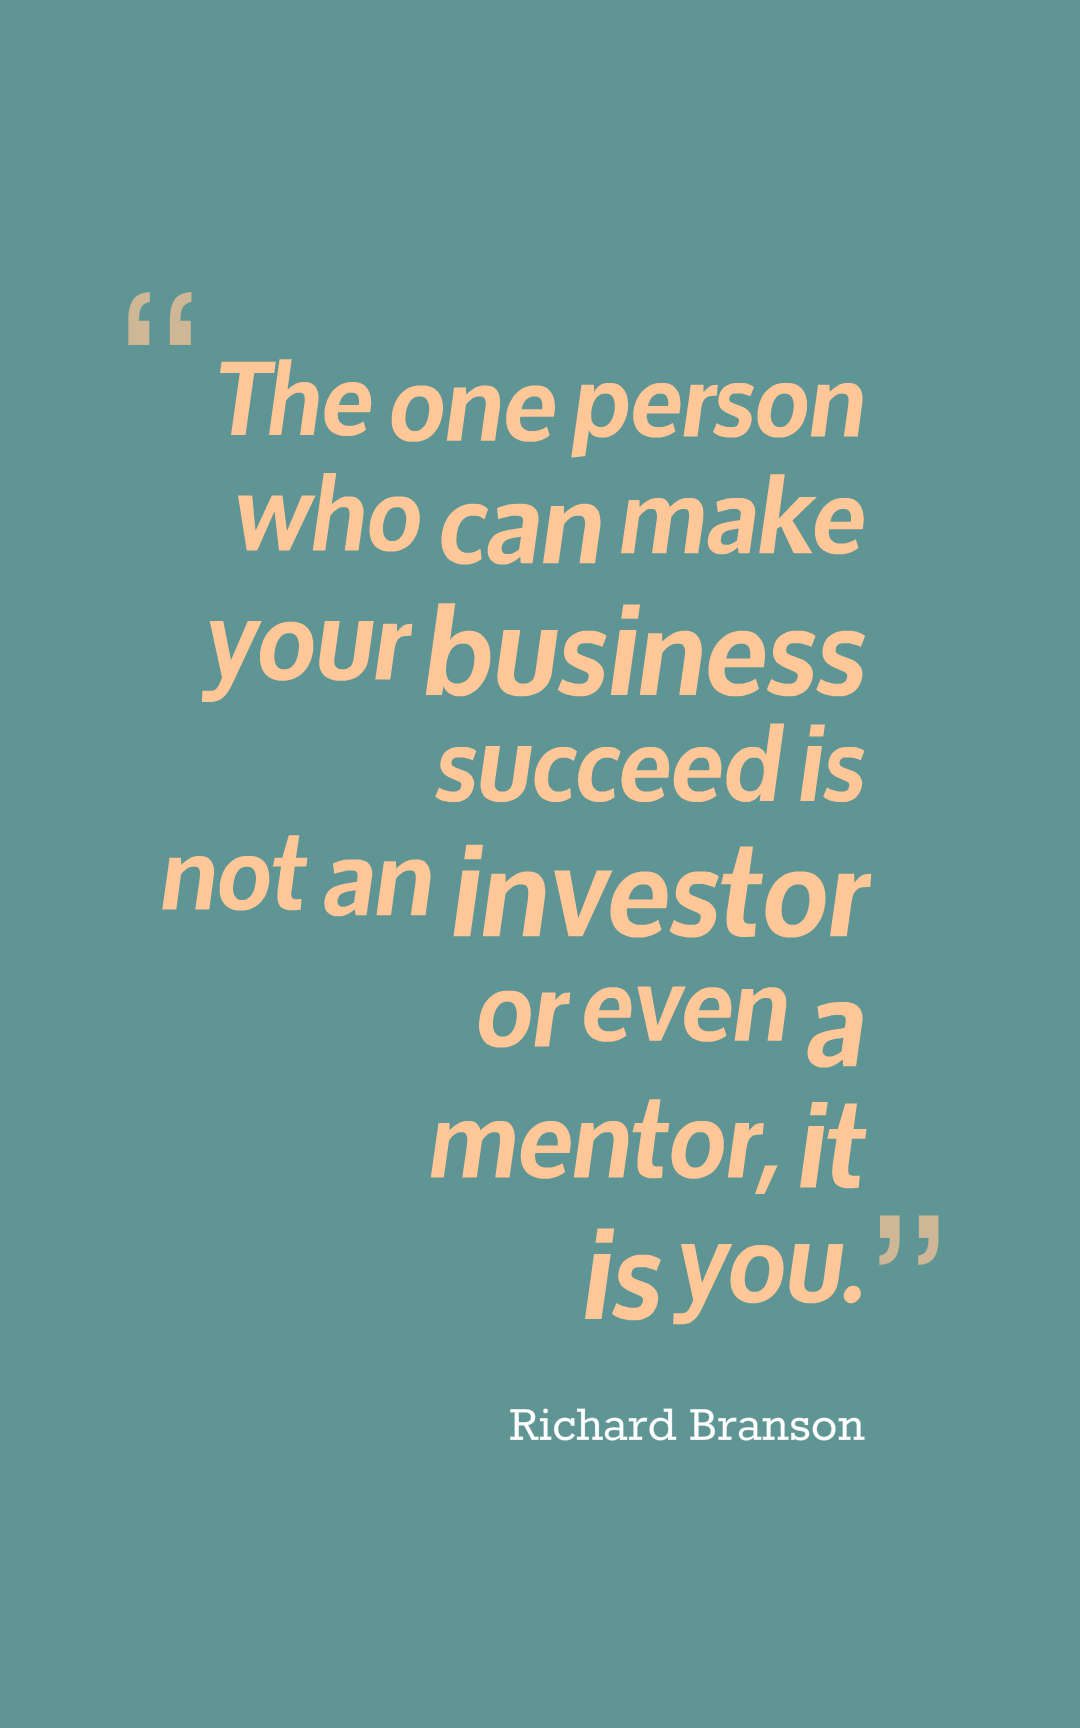 The one person who can make your business succeed is not an investor or even a mentor, it is you.